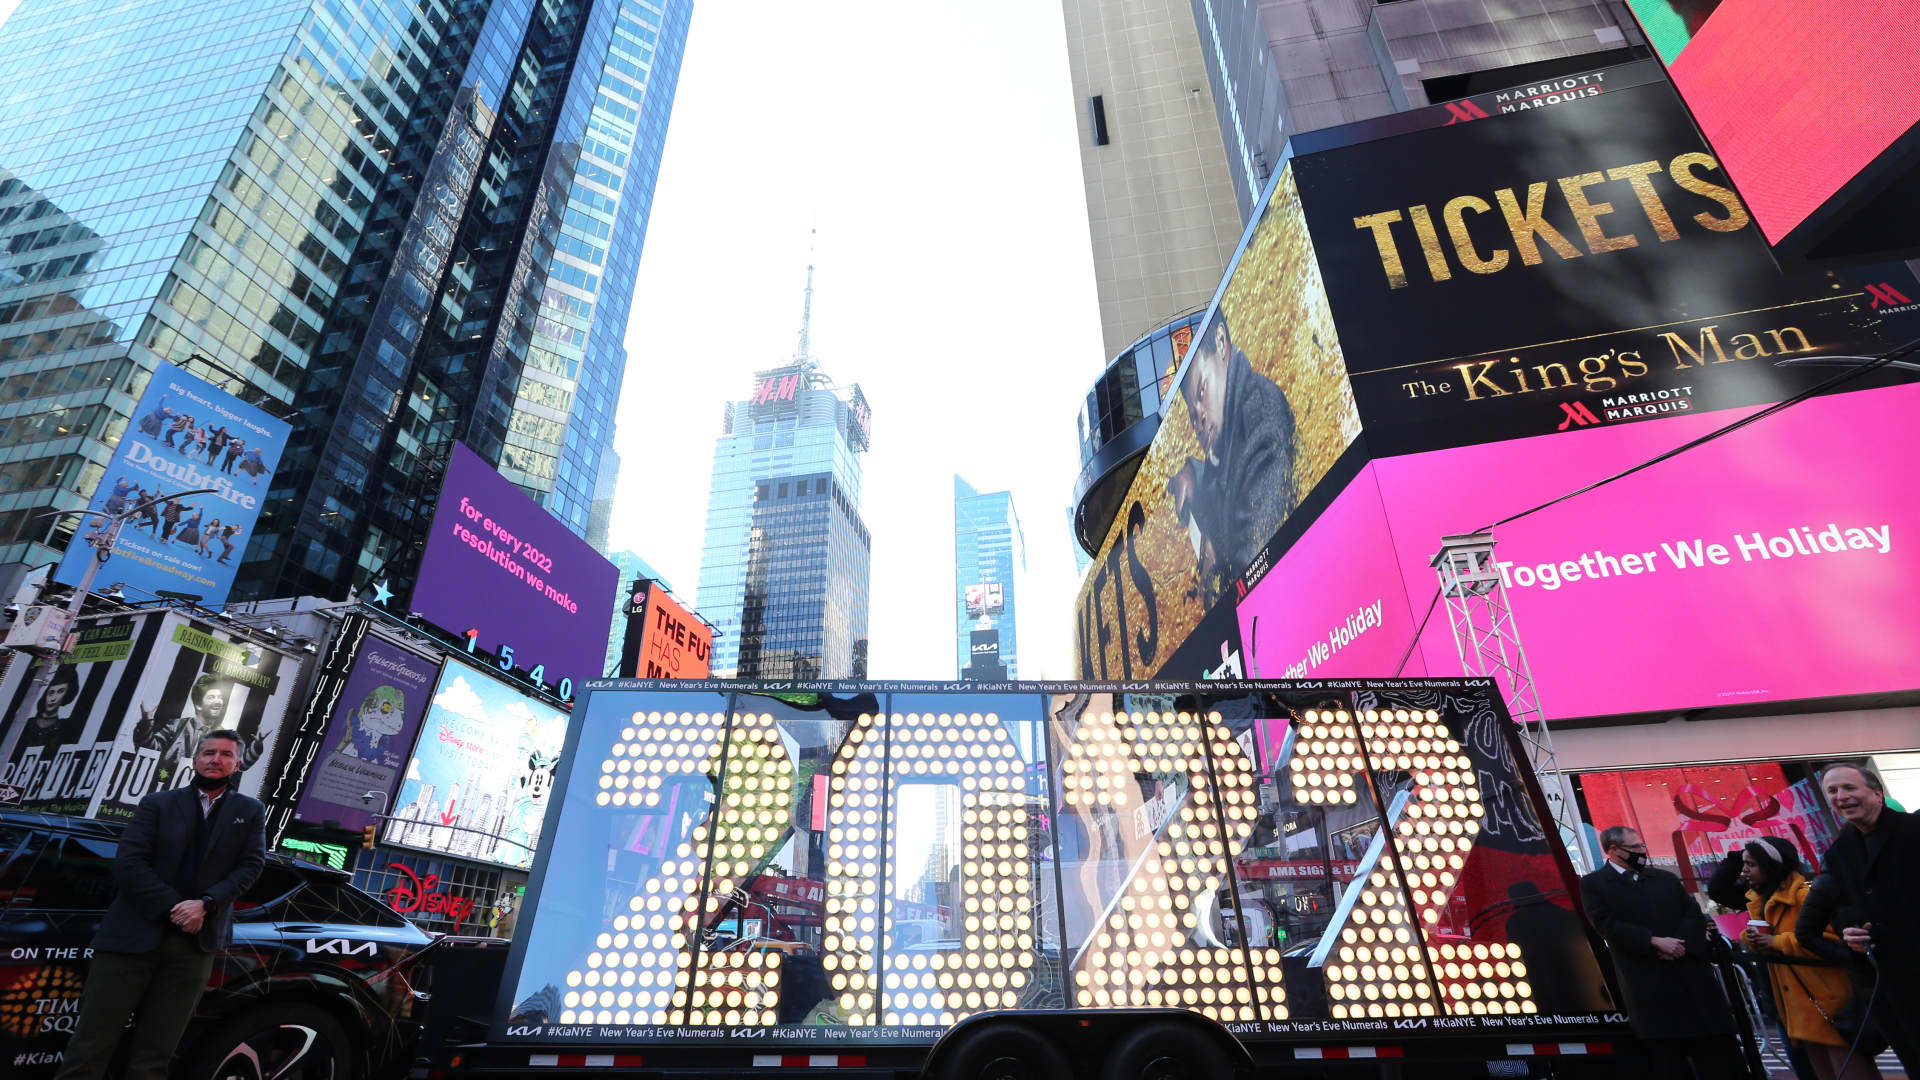 New Year's Eve numerals for 2022 arrive in New York's Times Square on Dec. 20, 2021.